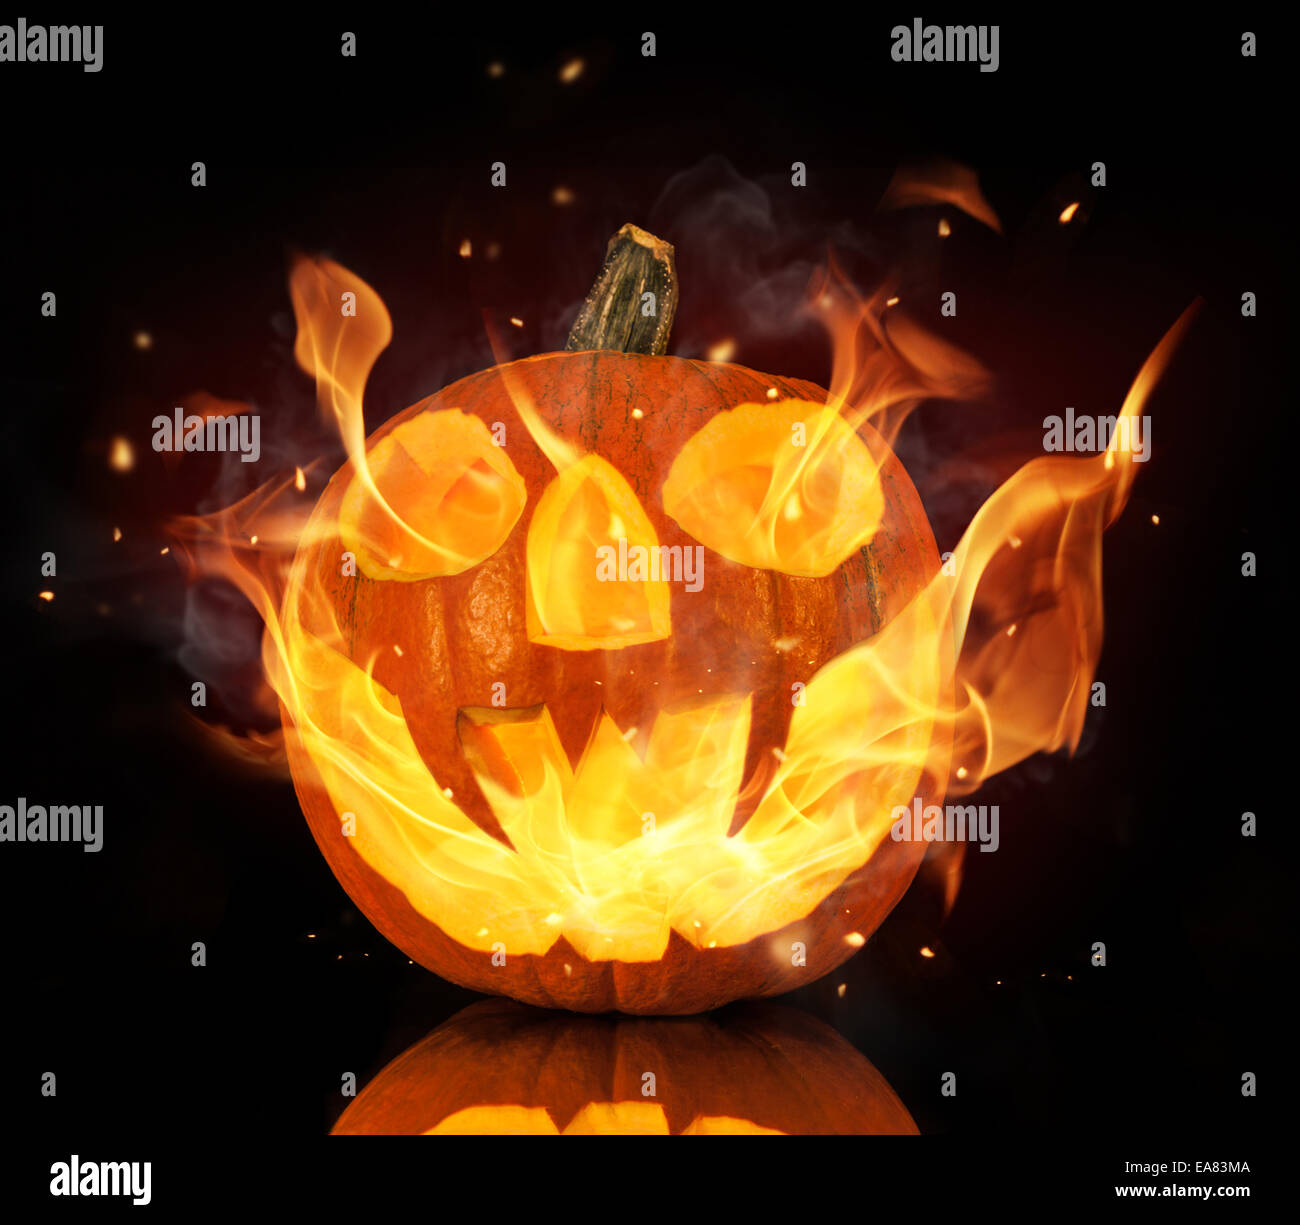 Halloween pumpkin with fire flames isolated on black background Stock Photo